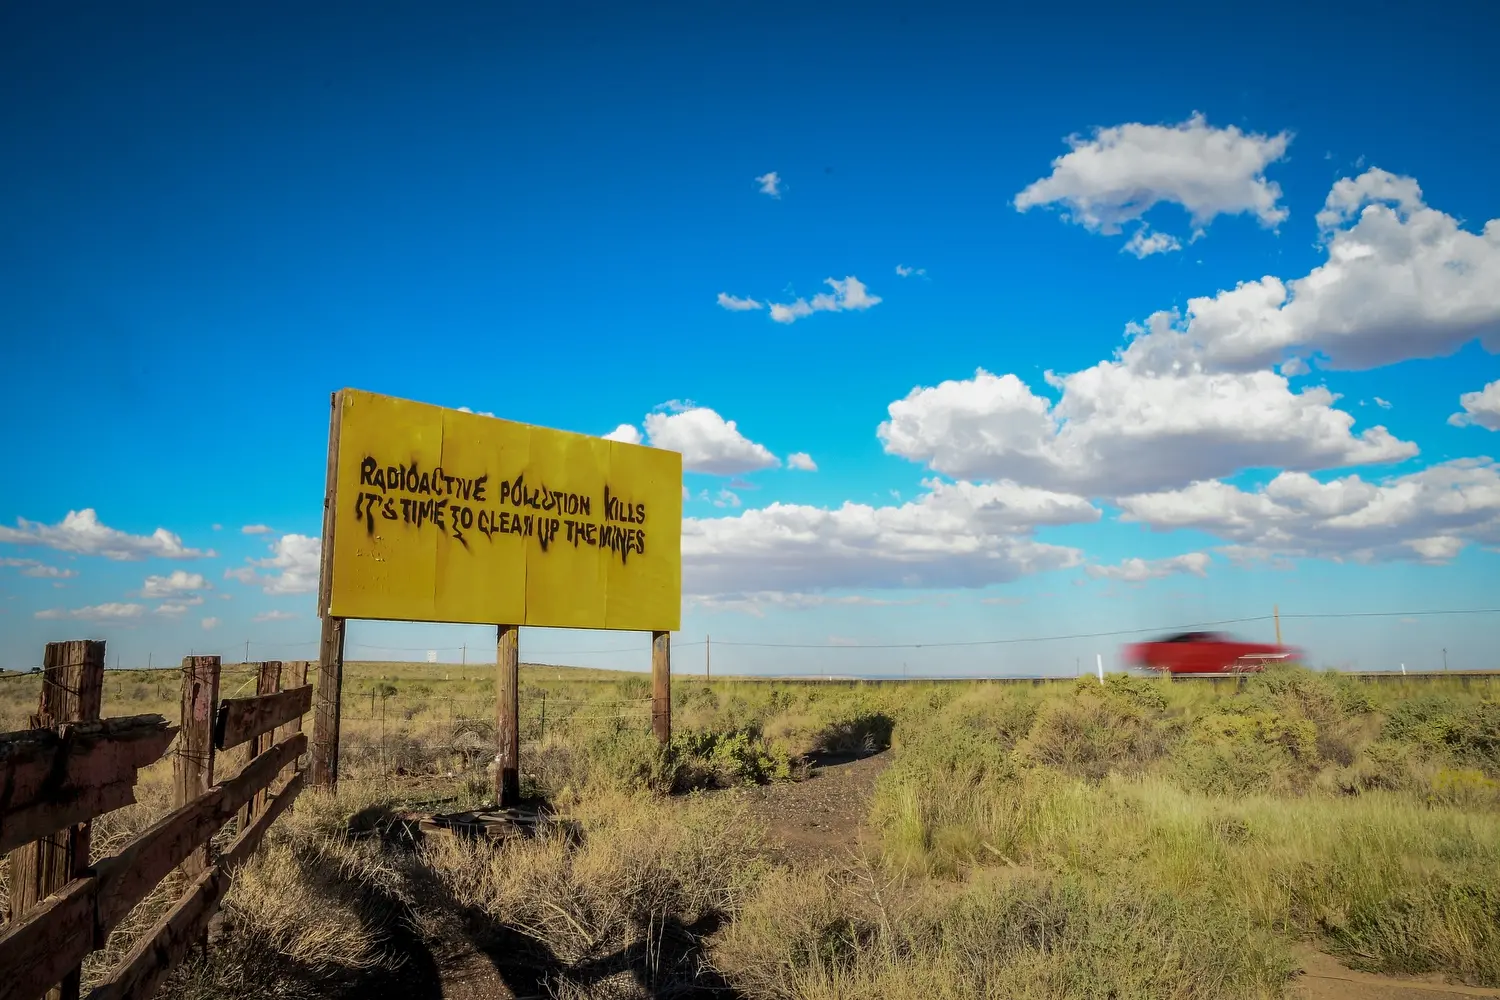 A sign along Highway 89 on the Navajo Nation in Arizona. Image by Mary F. Calvert. United States, 2020.